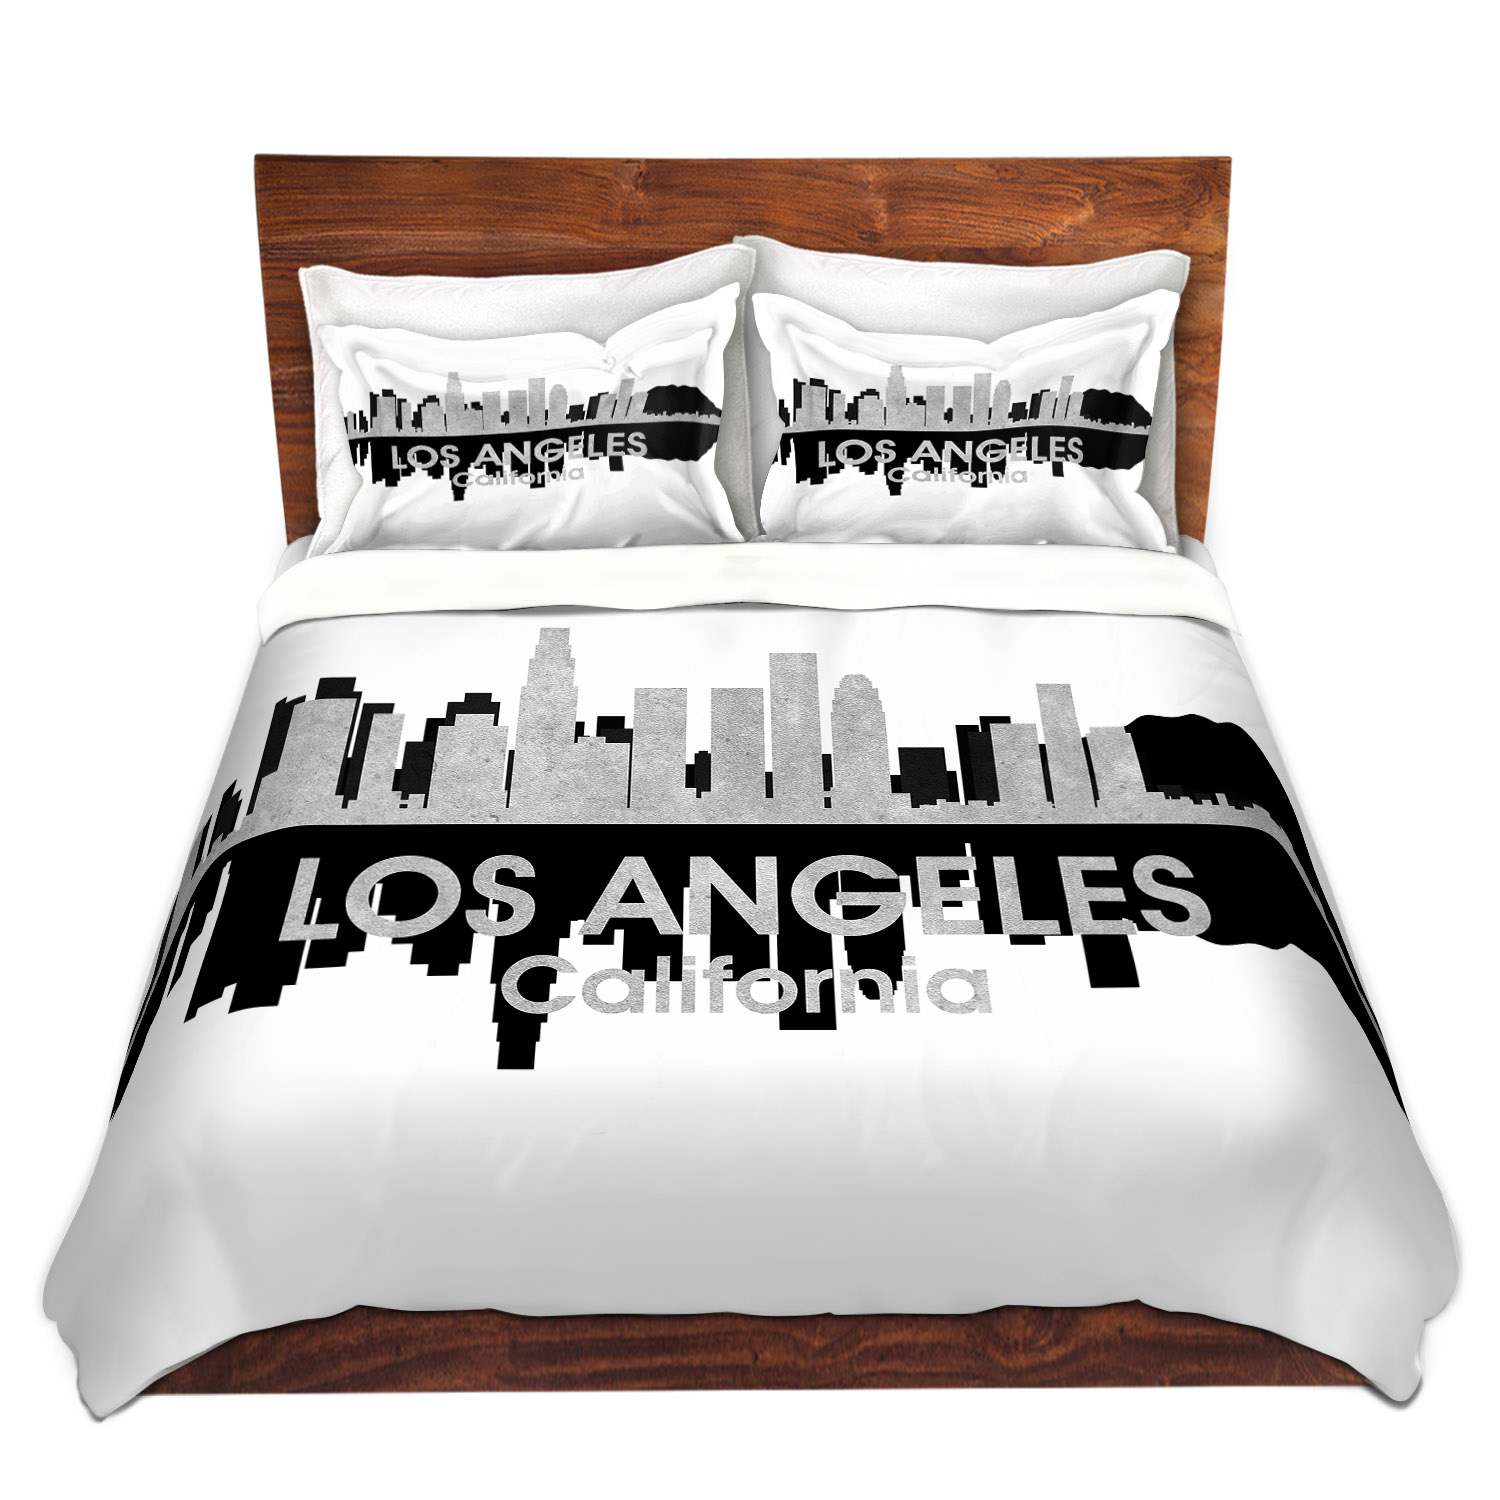 Dianoche Microfiber Duvet Covers By Angelina Vick City Iv Los Angeles California